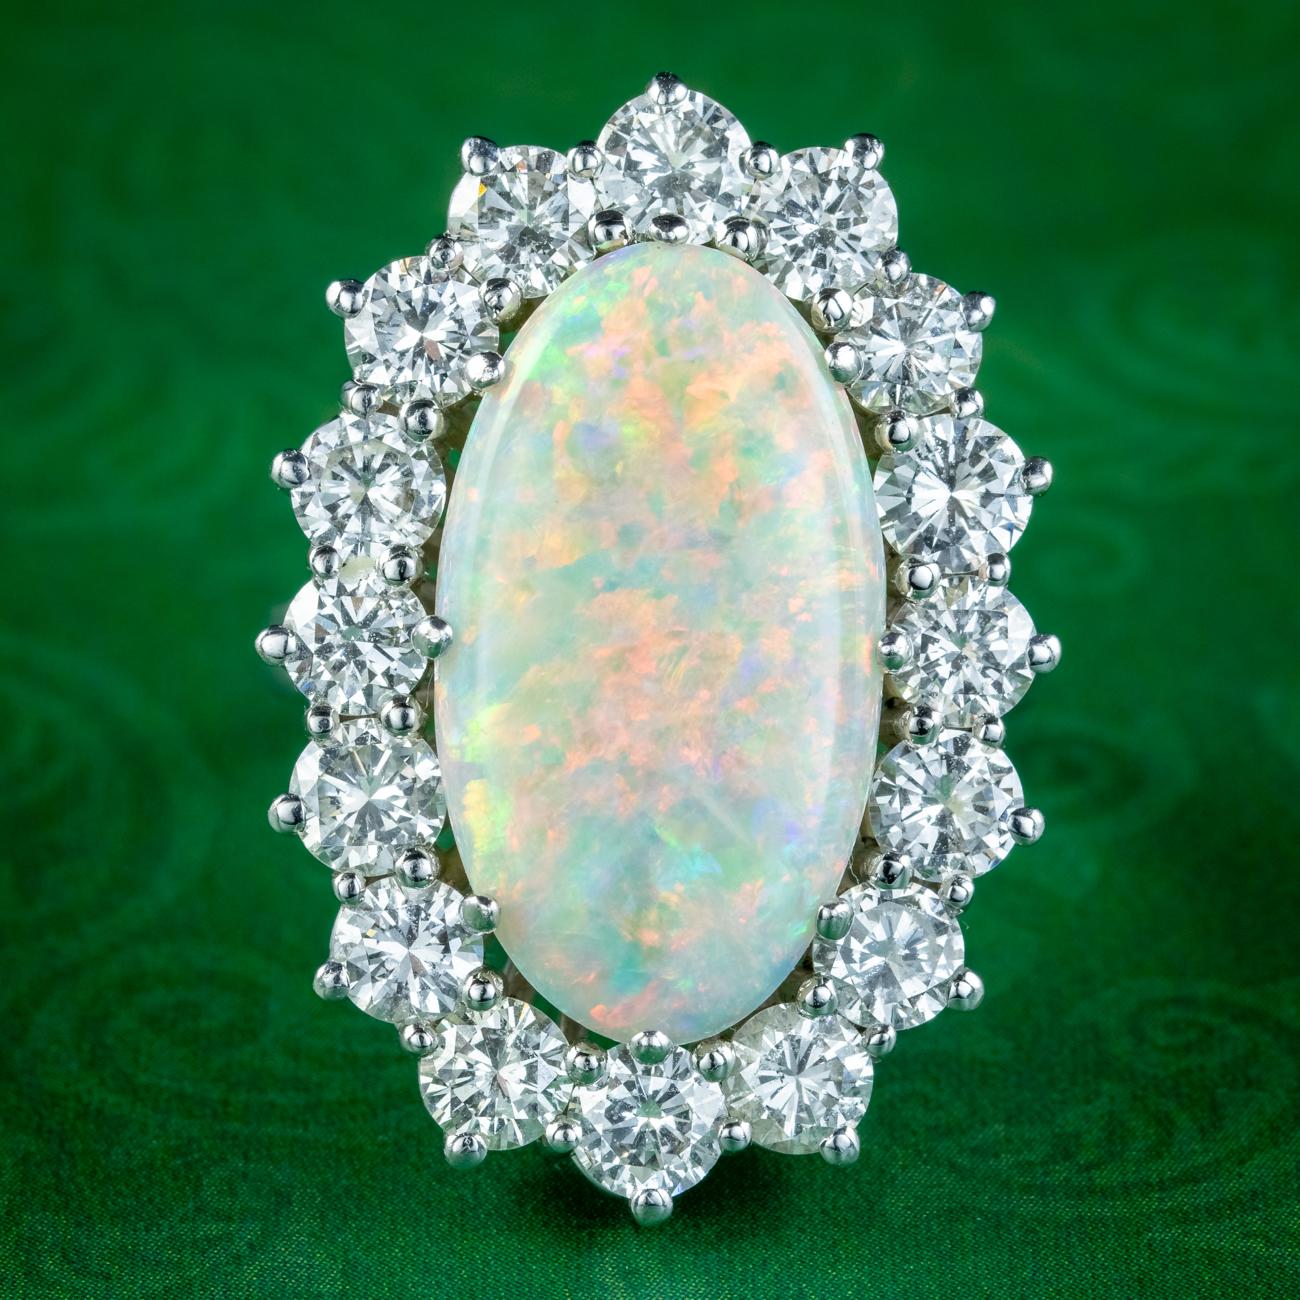 A spectacular vintage cocktail ring built around a spellbinding natural opal at its heart. It weighs approx. 12ct and displays a rainbow of vibrant colours dancing under the surface. It’s complemented by a halo of sixteen bright, clean brilliant cut